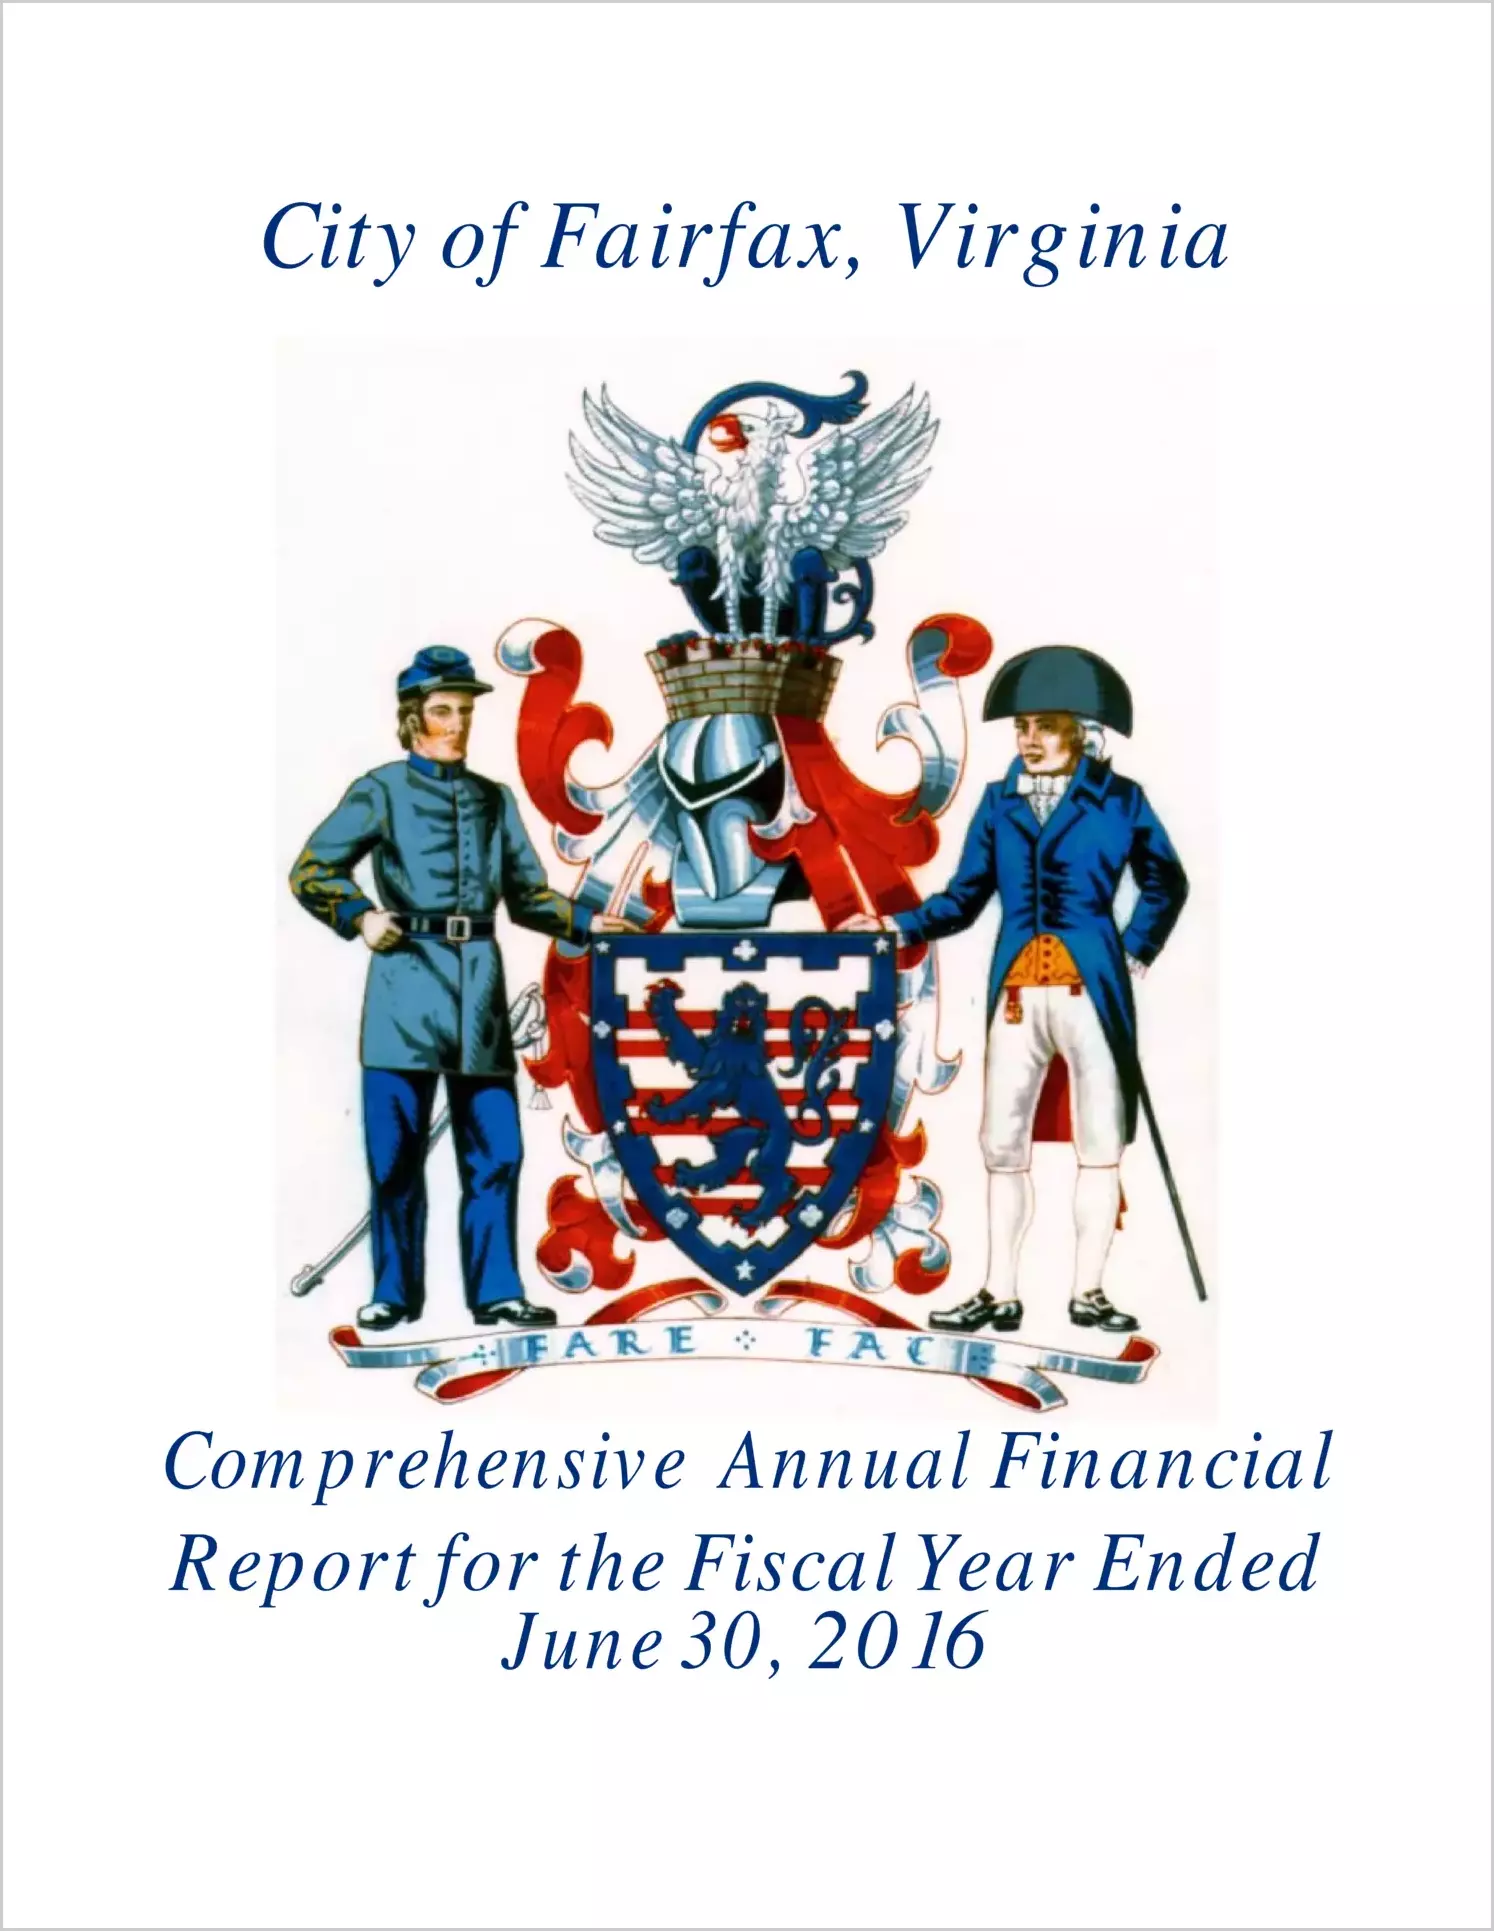 2016 Annual Financial Report for City of Fairfax